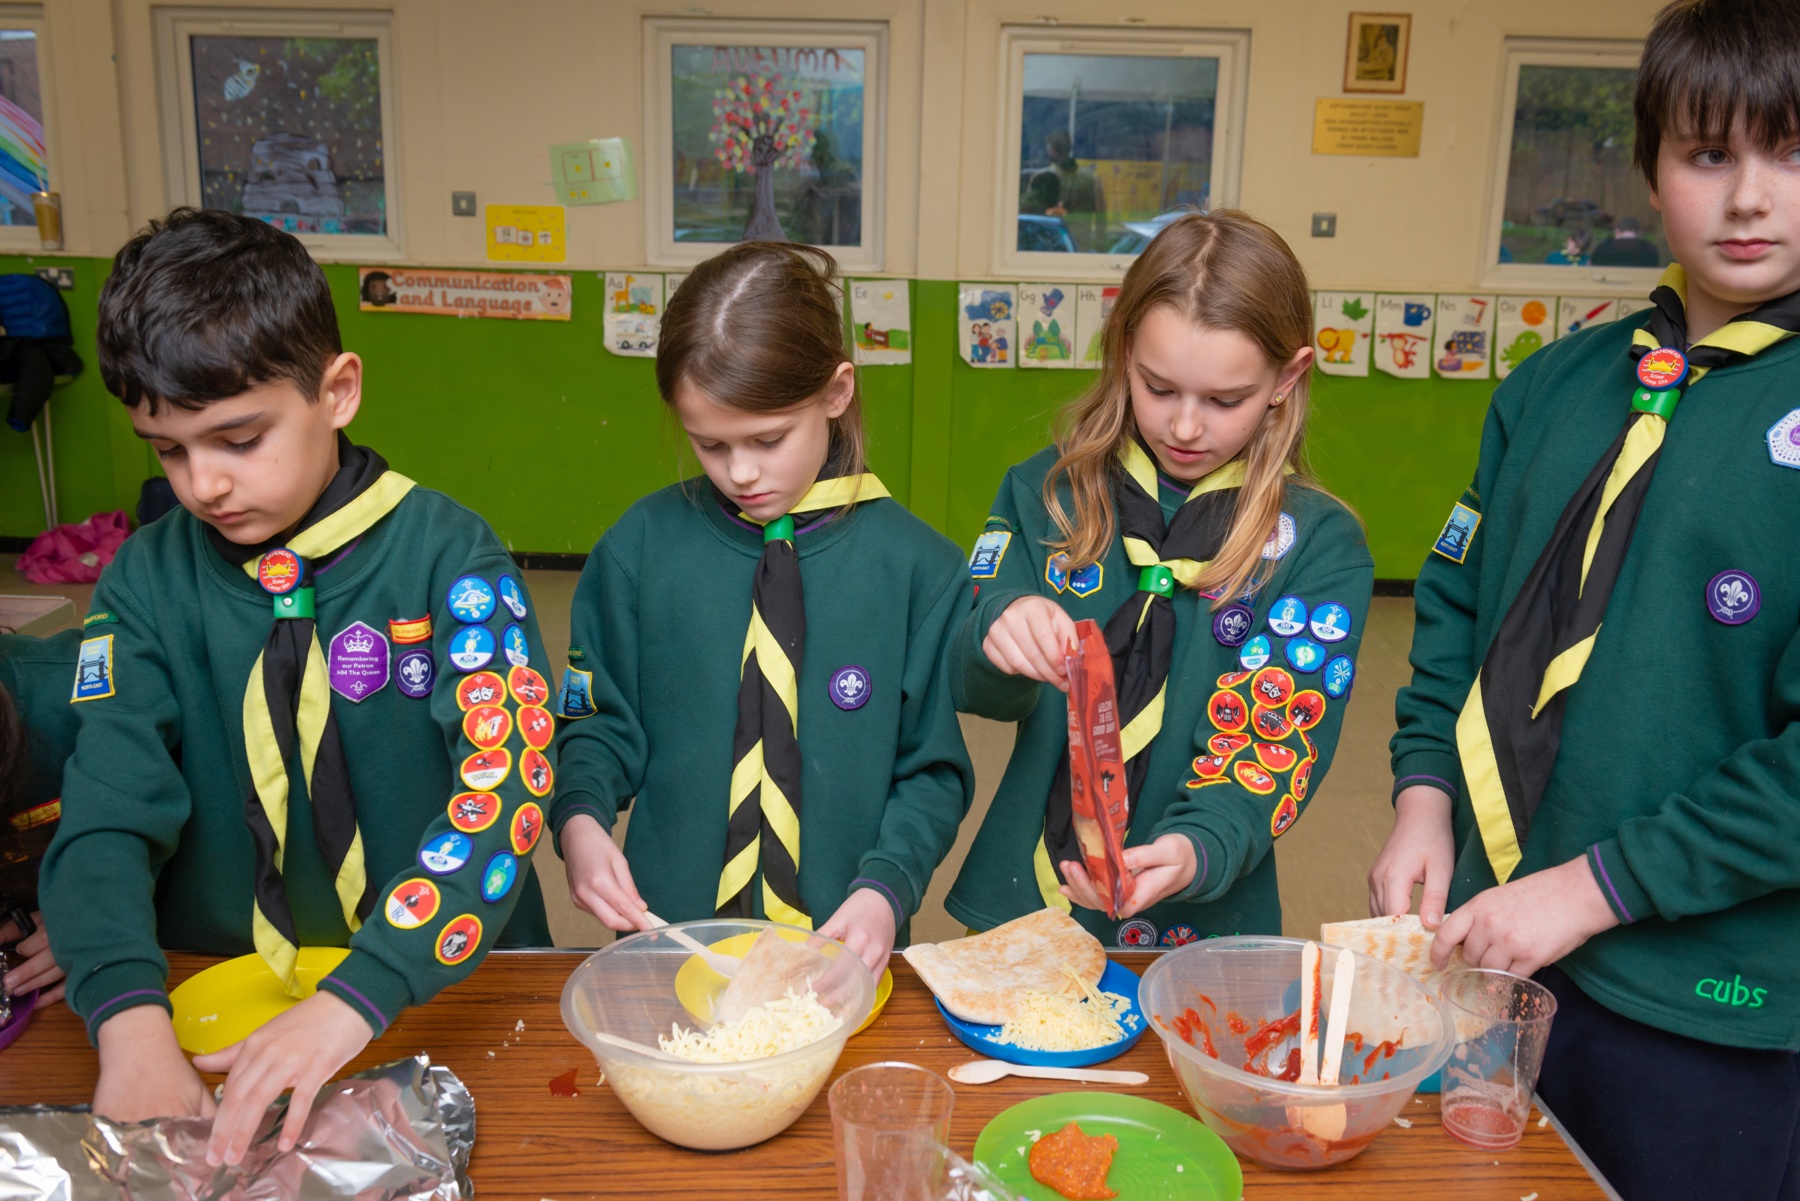 Four Cubs are stood behind a brown table with mixing bowls, plates, grated cheese and pitta breads in front of them. They're all in uniform and neckers, looking down at their plates. They're busy making pitta pockets.